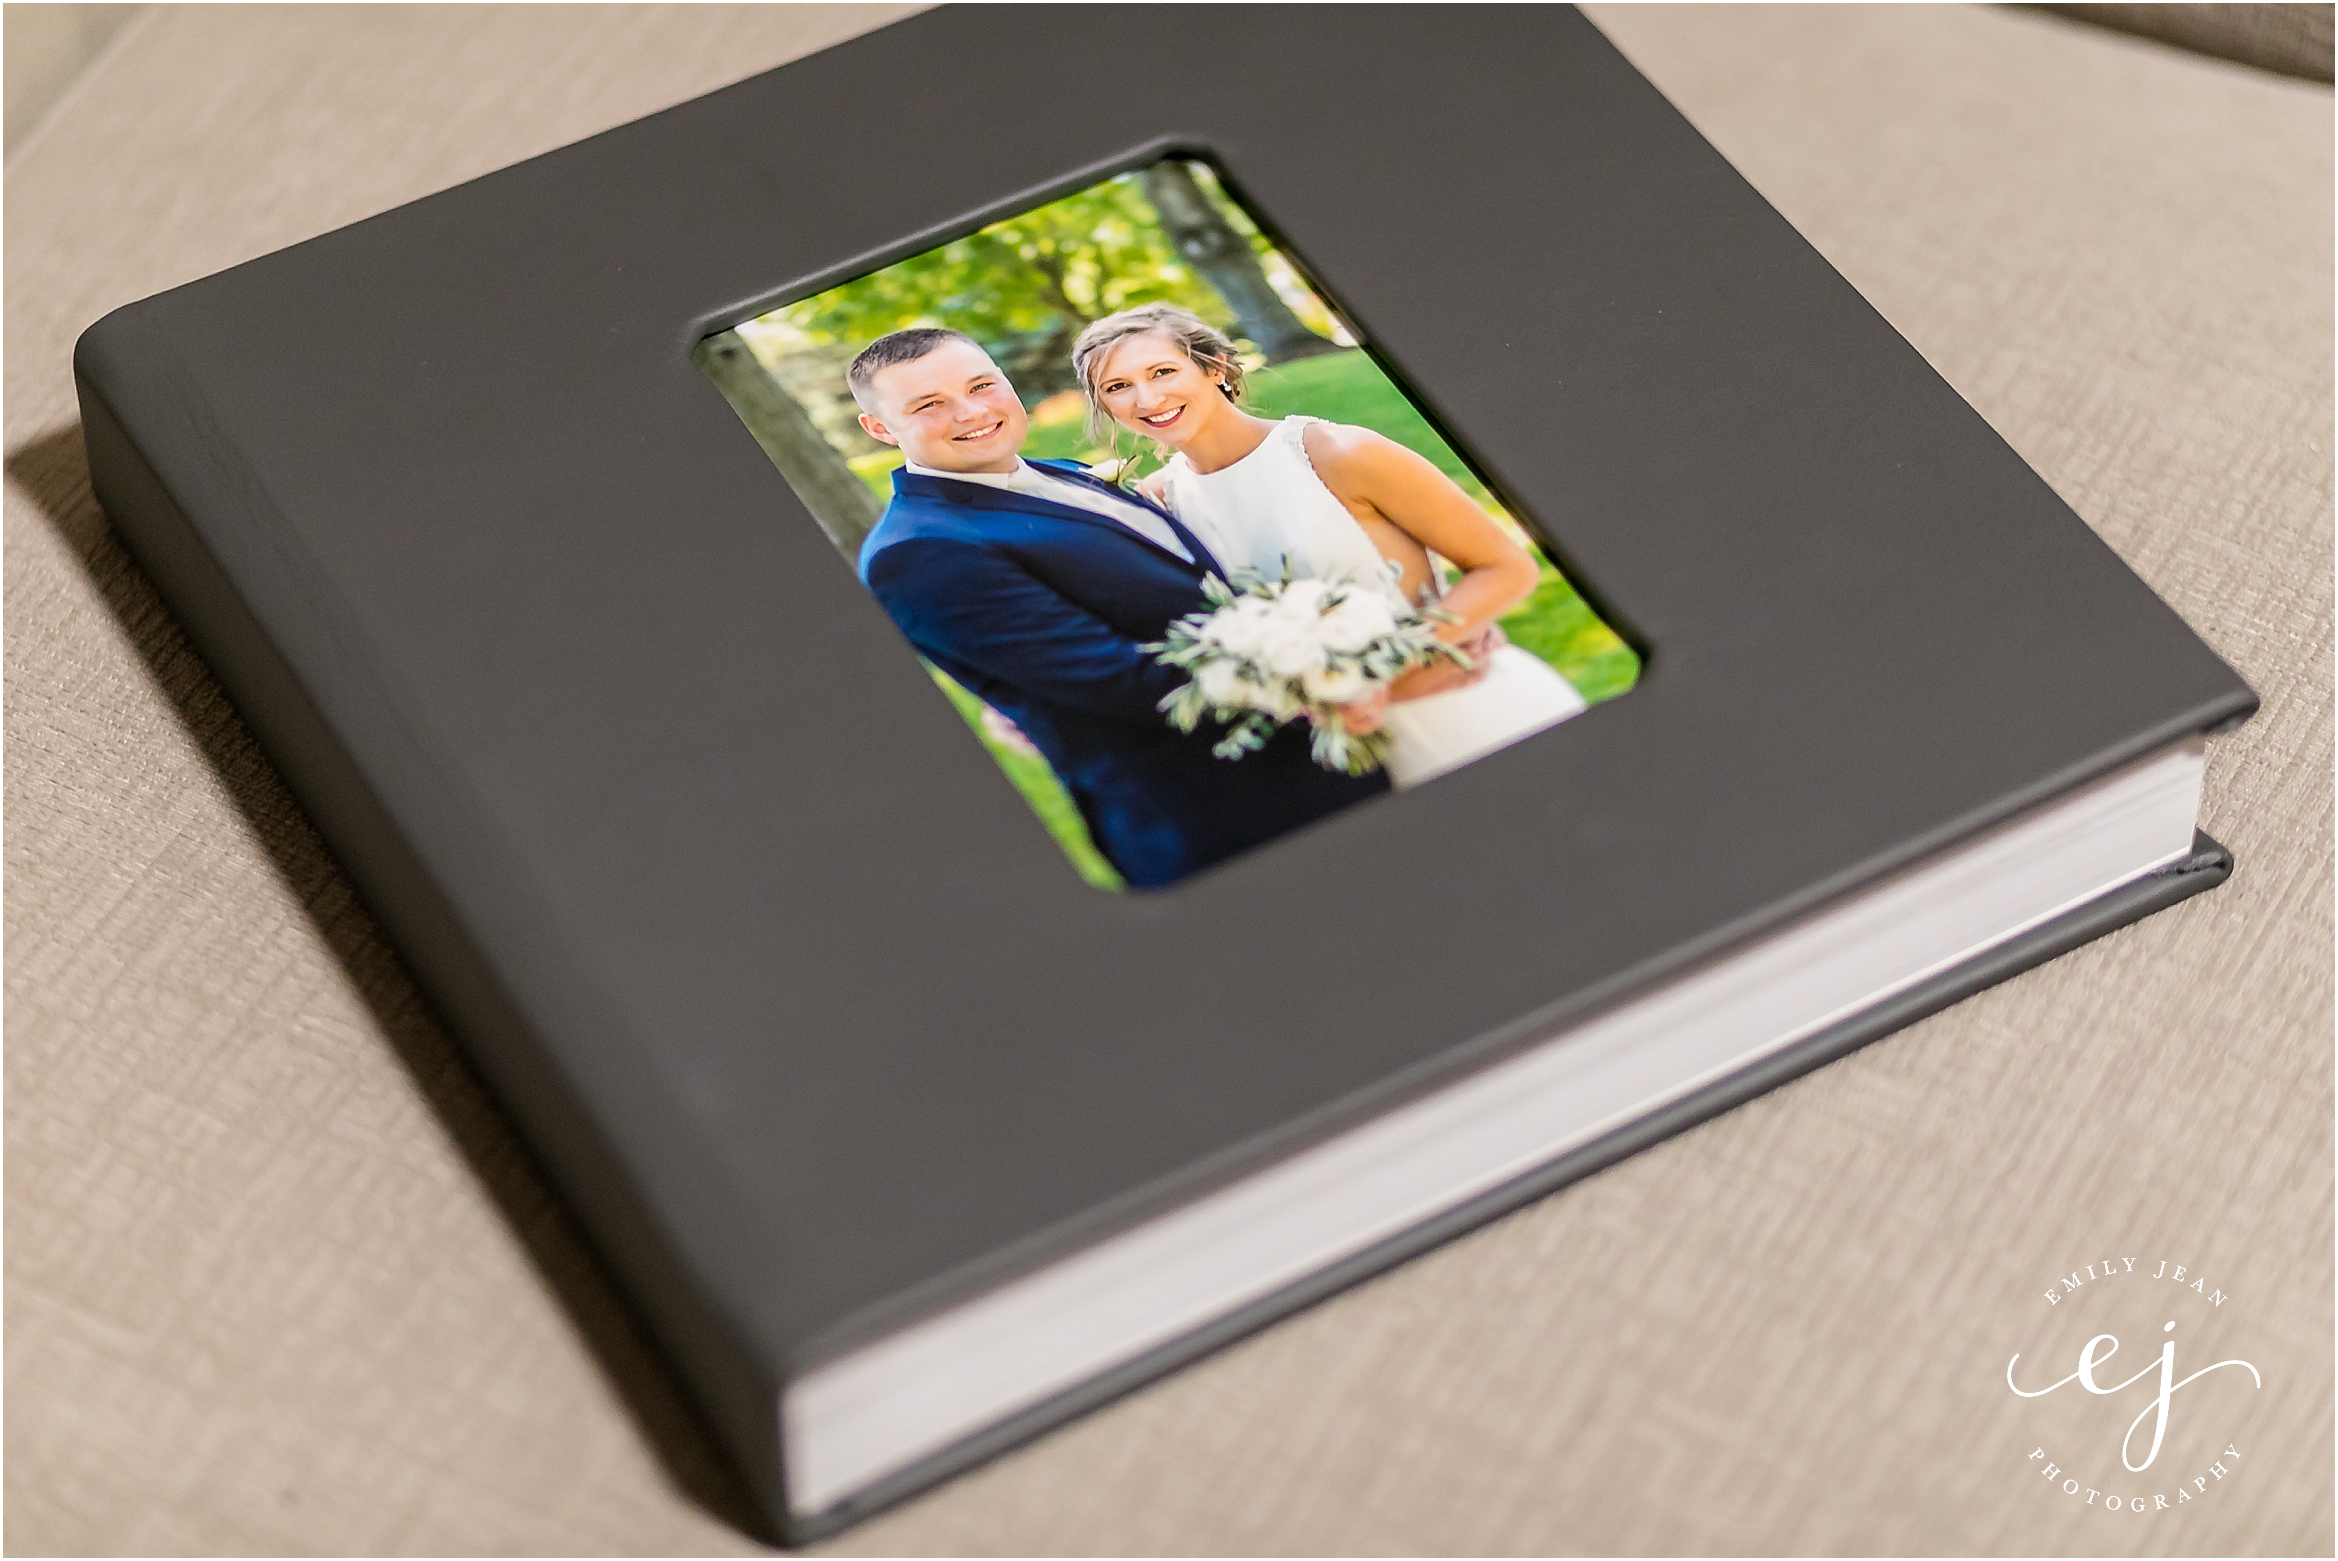 miller's lab ash gray wedding album leather with photo cover